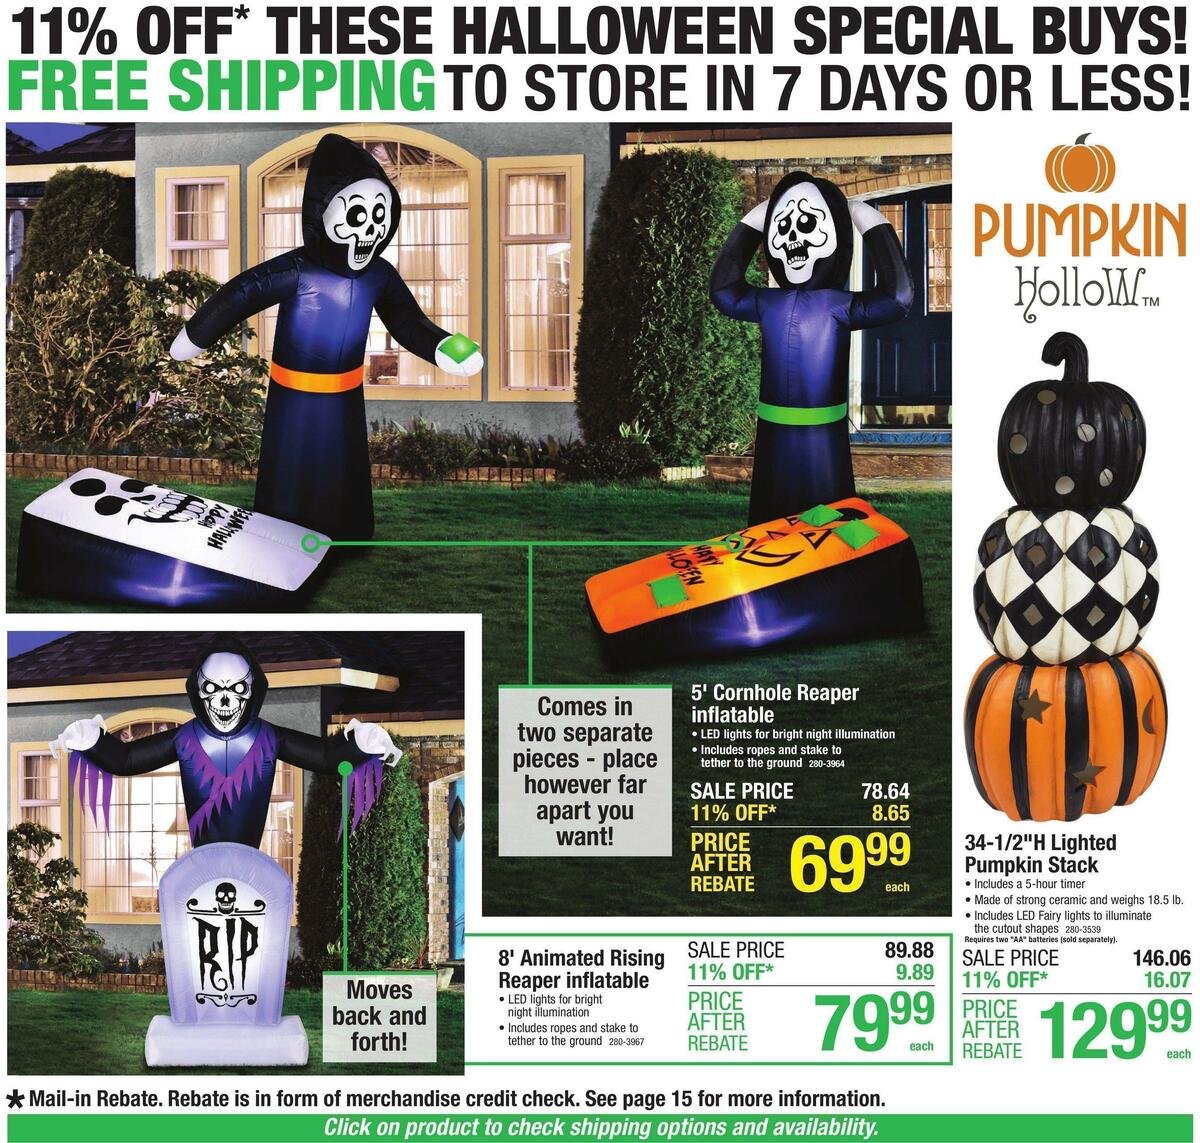 Menards Weekly Ad from September 28